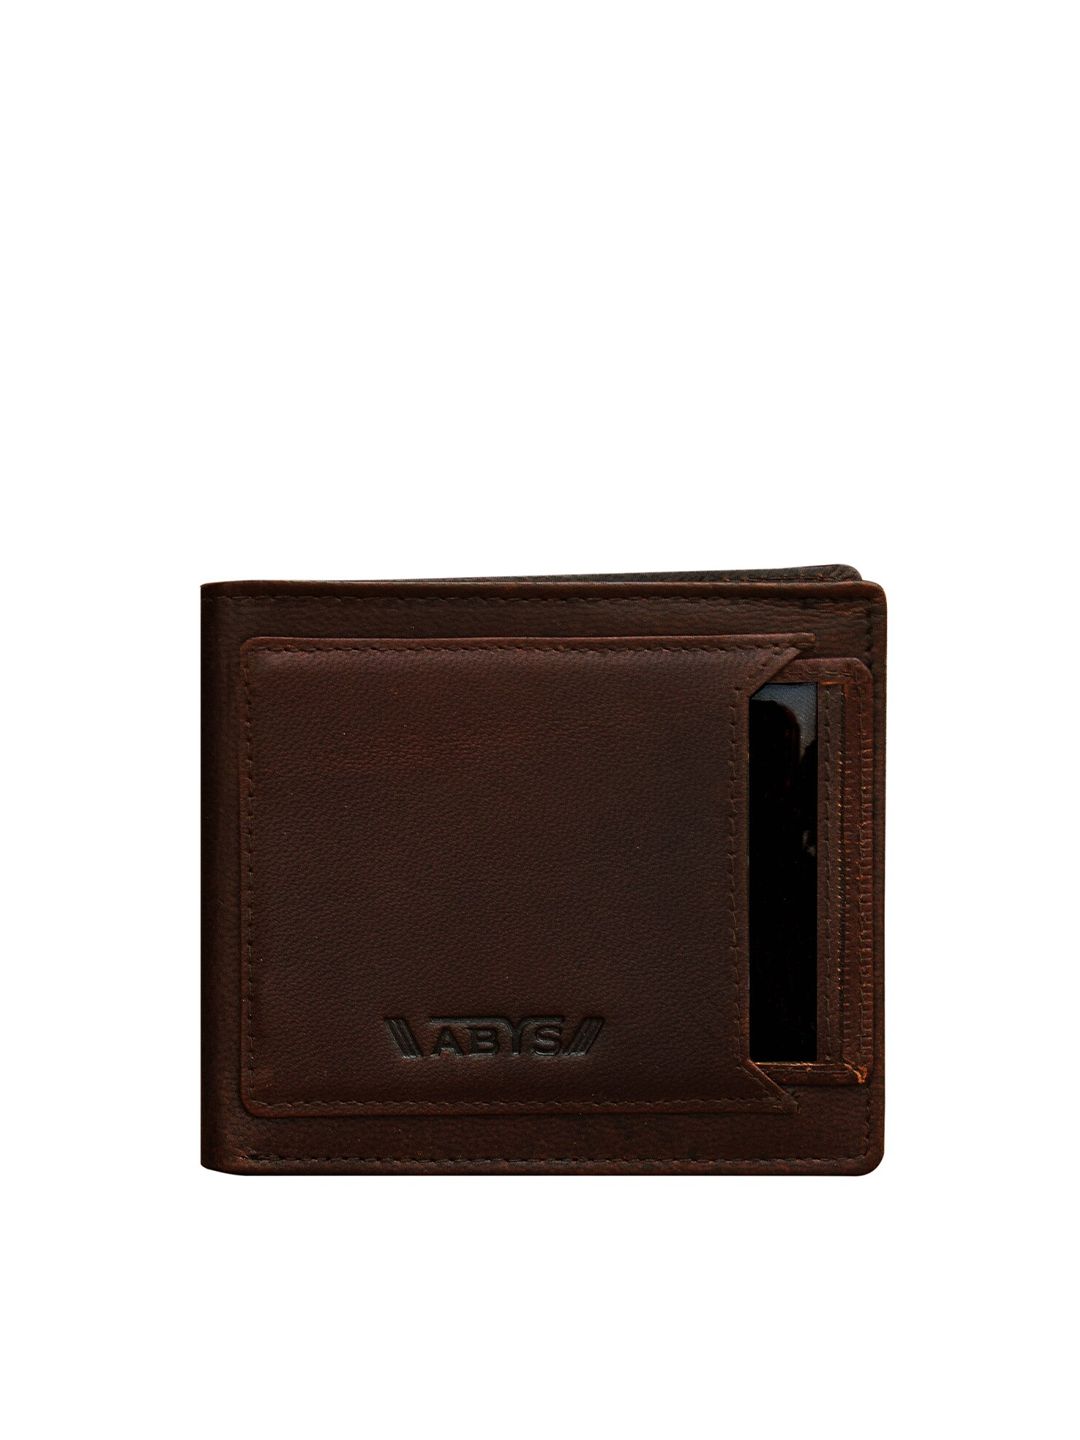 ABYS Unisex Brown Solid Leather Two Fold Wallet Price in India